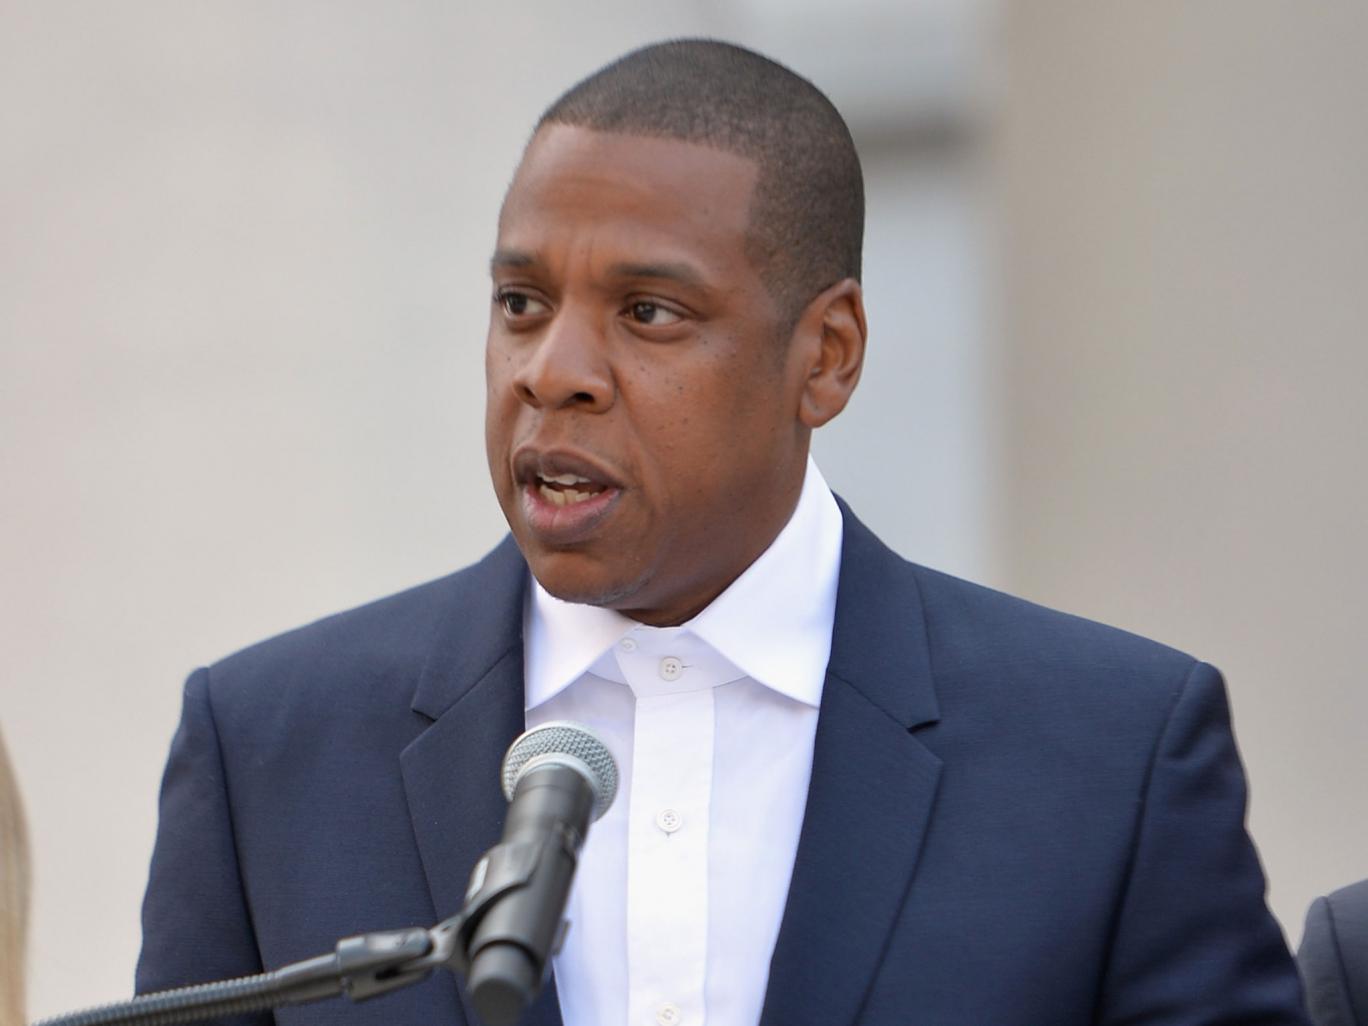 Photo of Jay Z ‘forgot’ he owned music streaming service Tidal